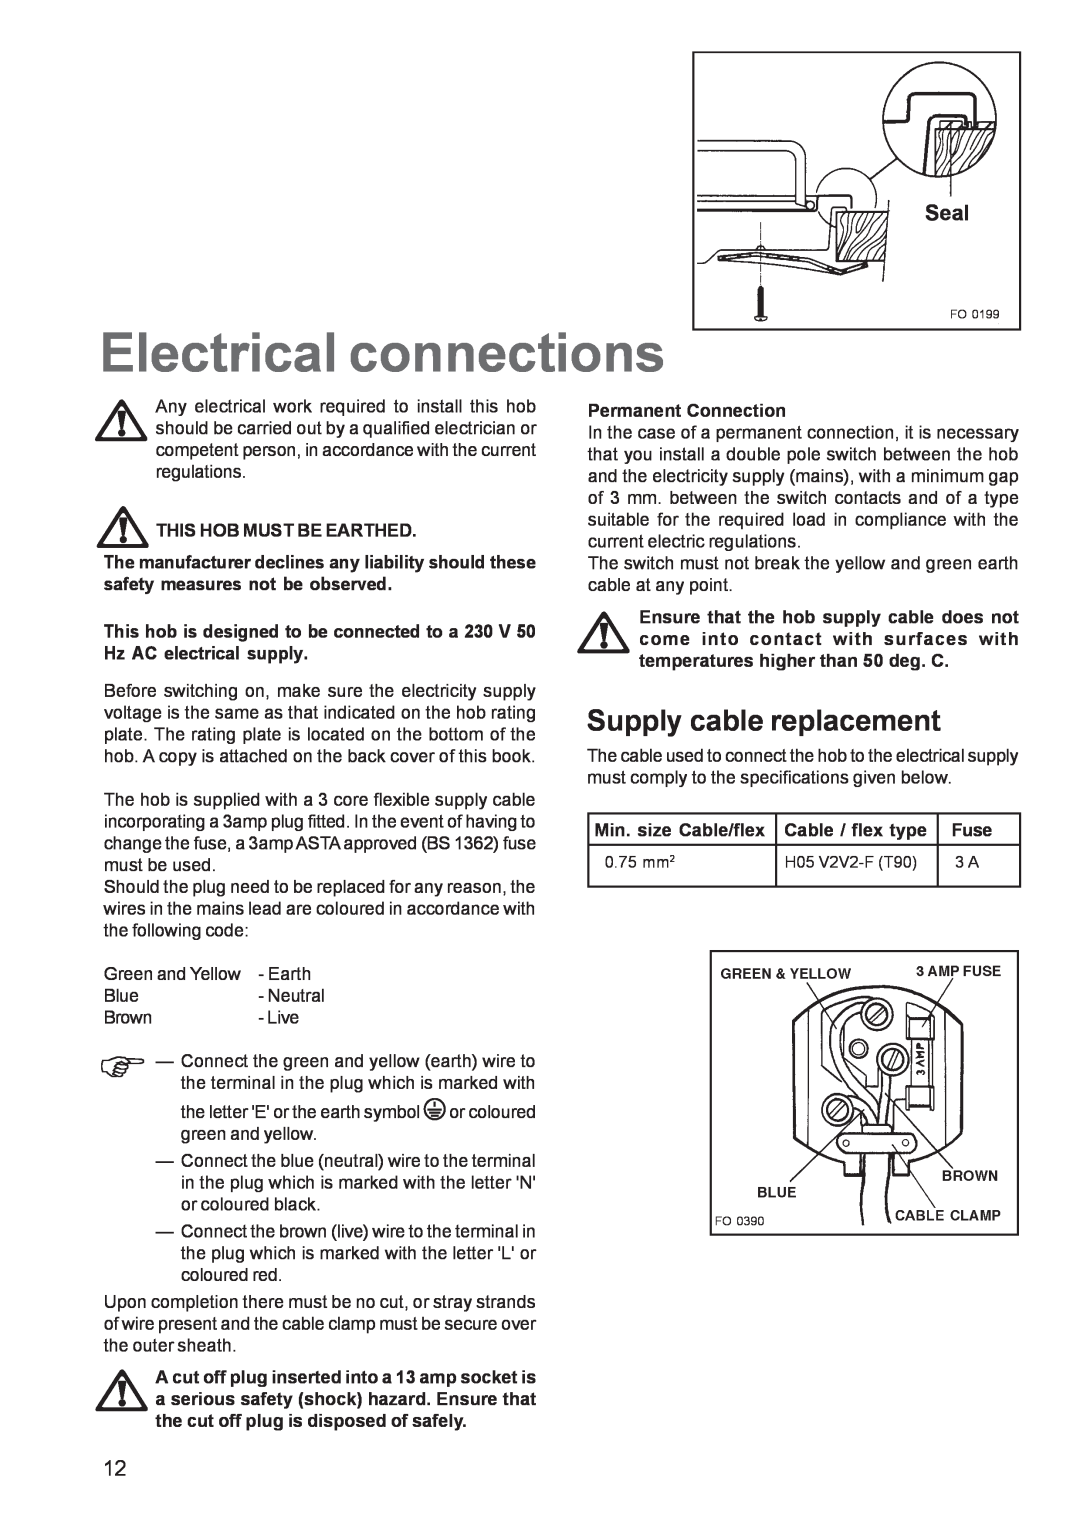 Zanussi ZGF 982 manual Electrical connections, Supply cable replacement, aSeal 